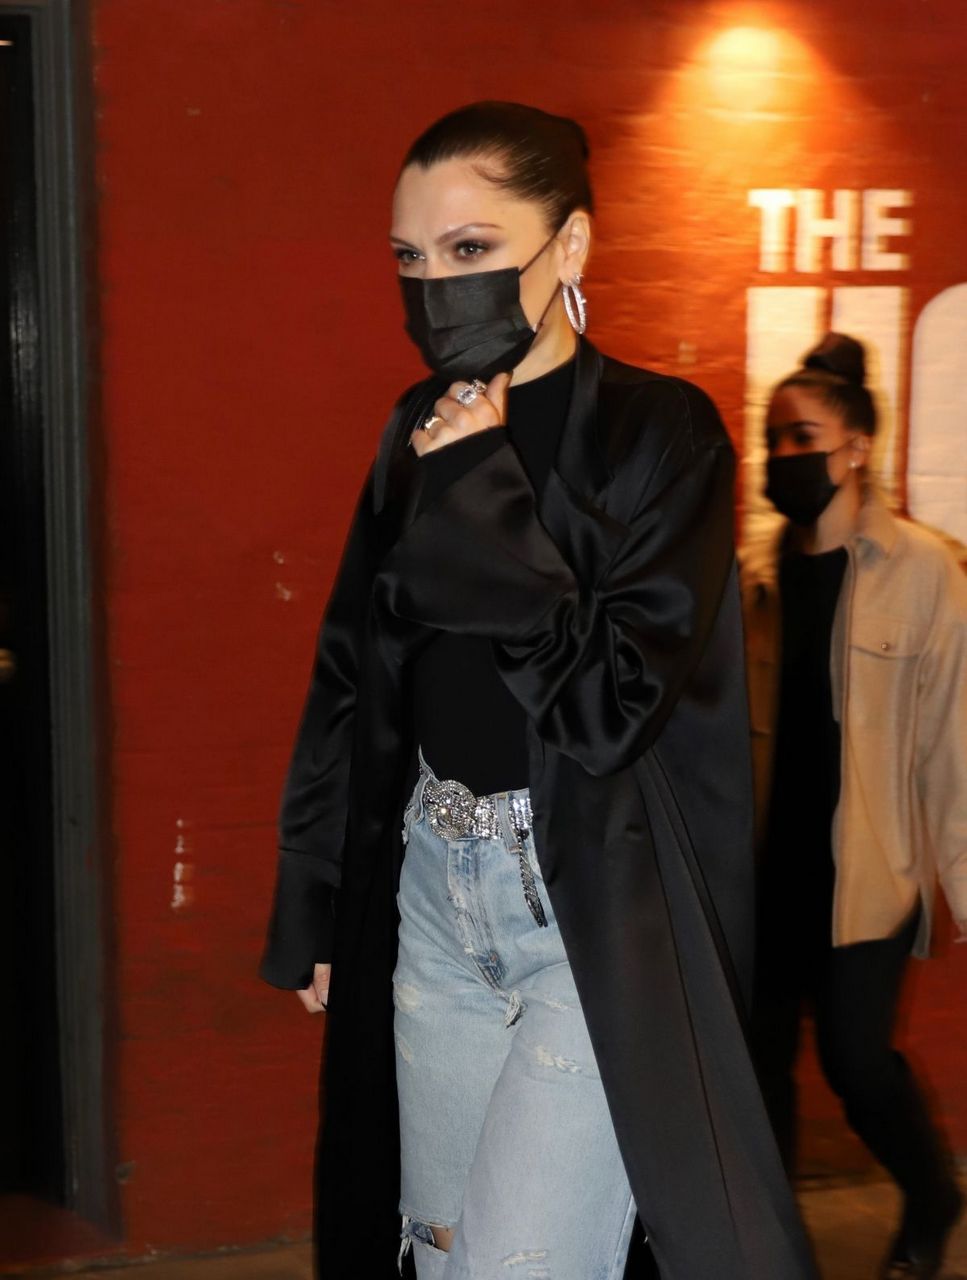 Jessie J After Her Performance Hotel Cafe Hollywood